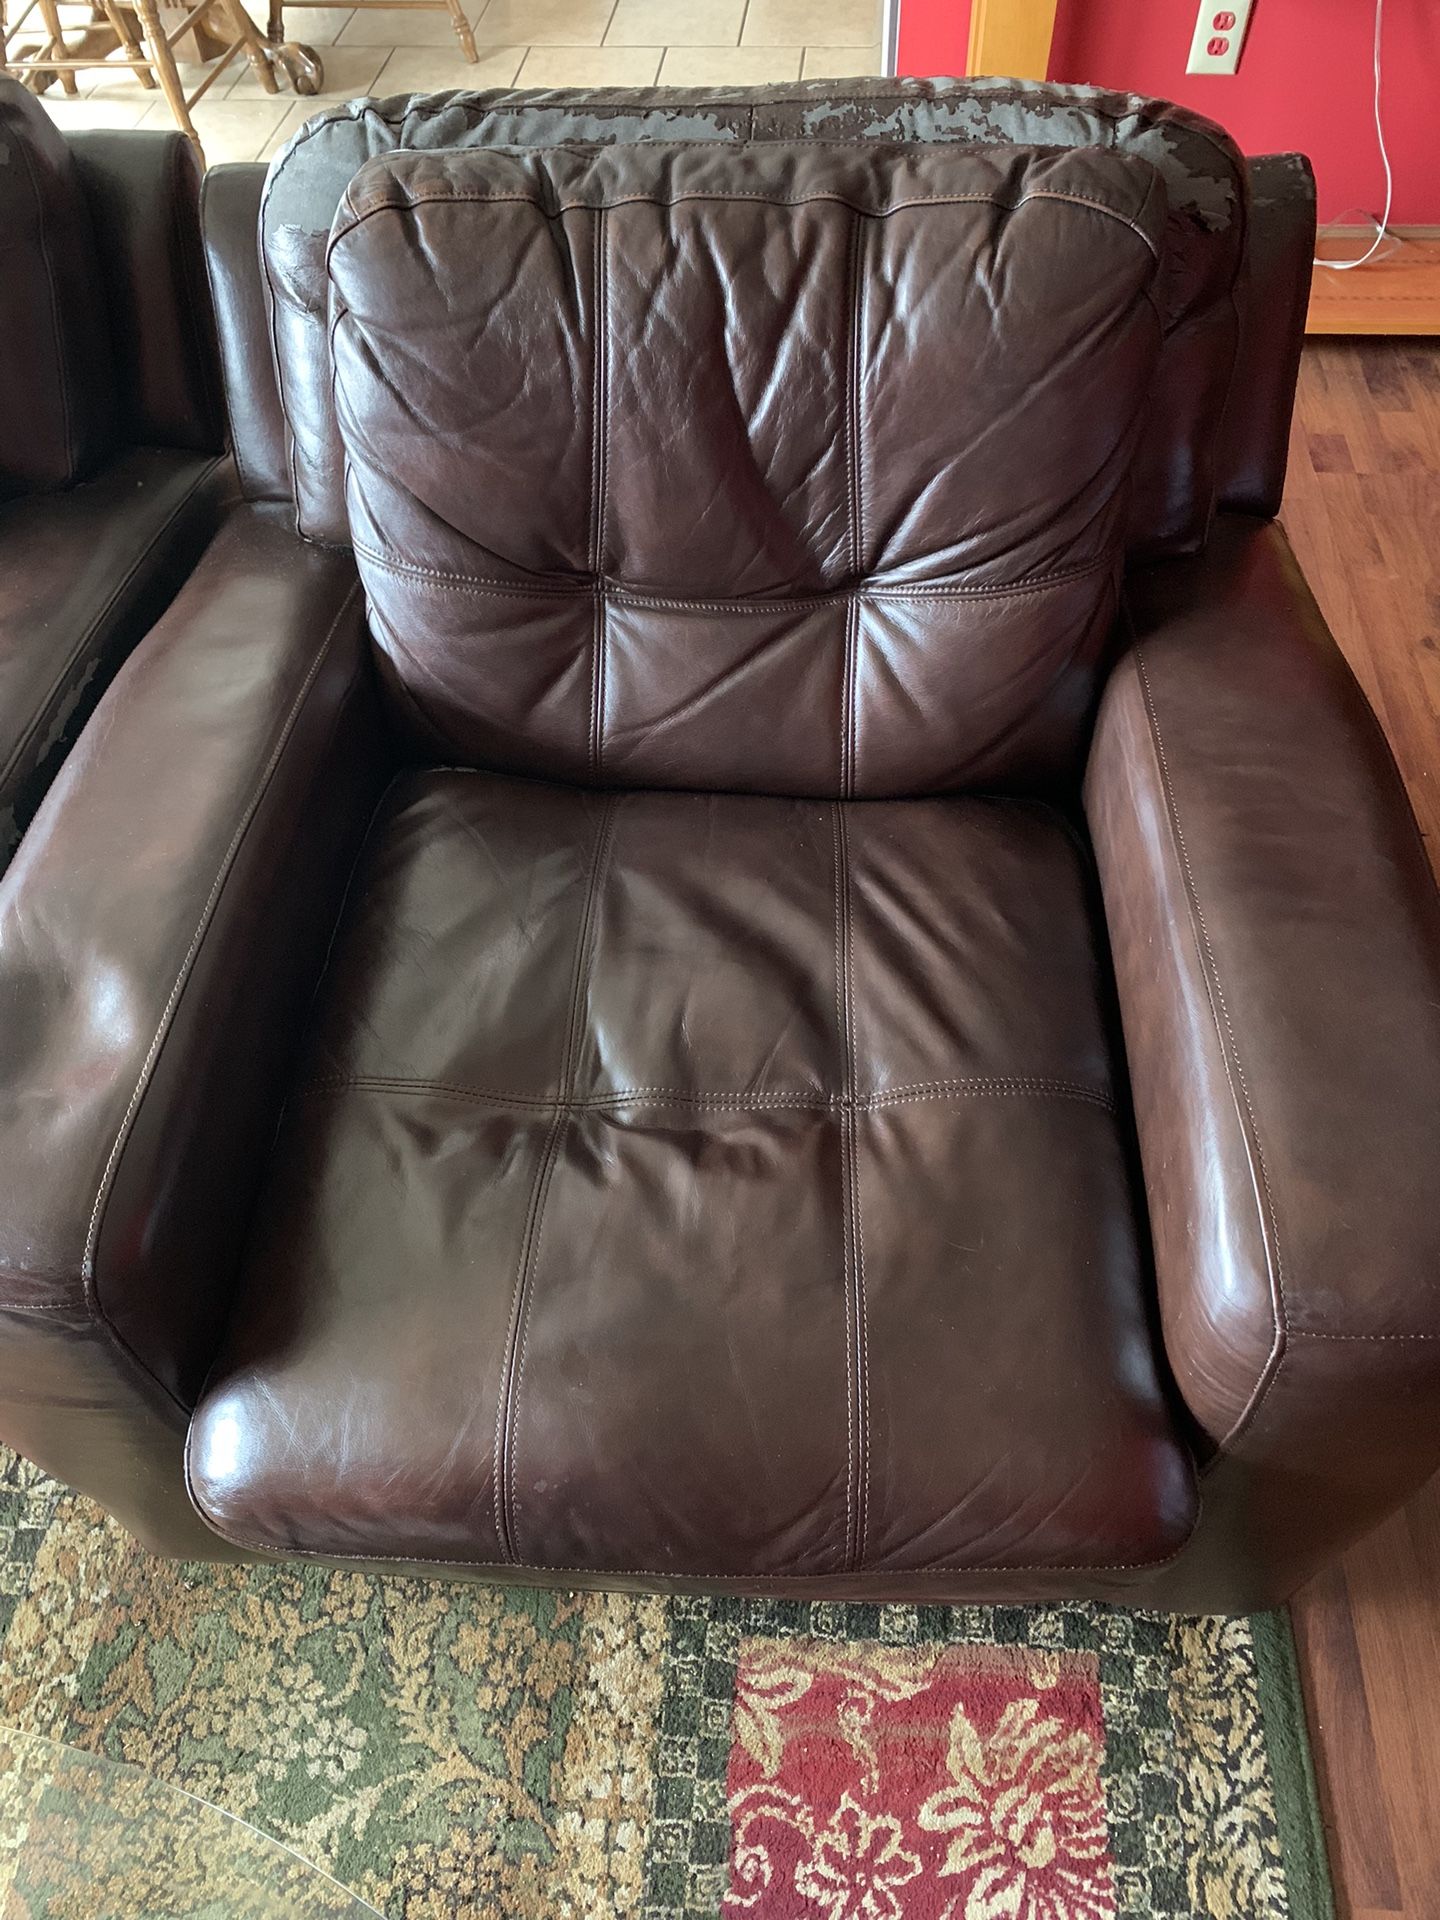 2 Leather Couches And 2 Leather Single Chairs 